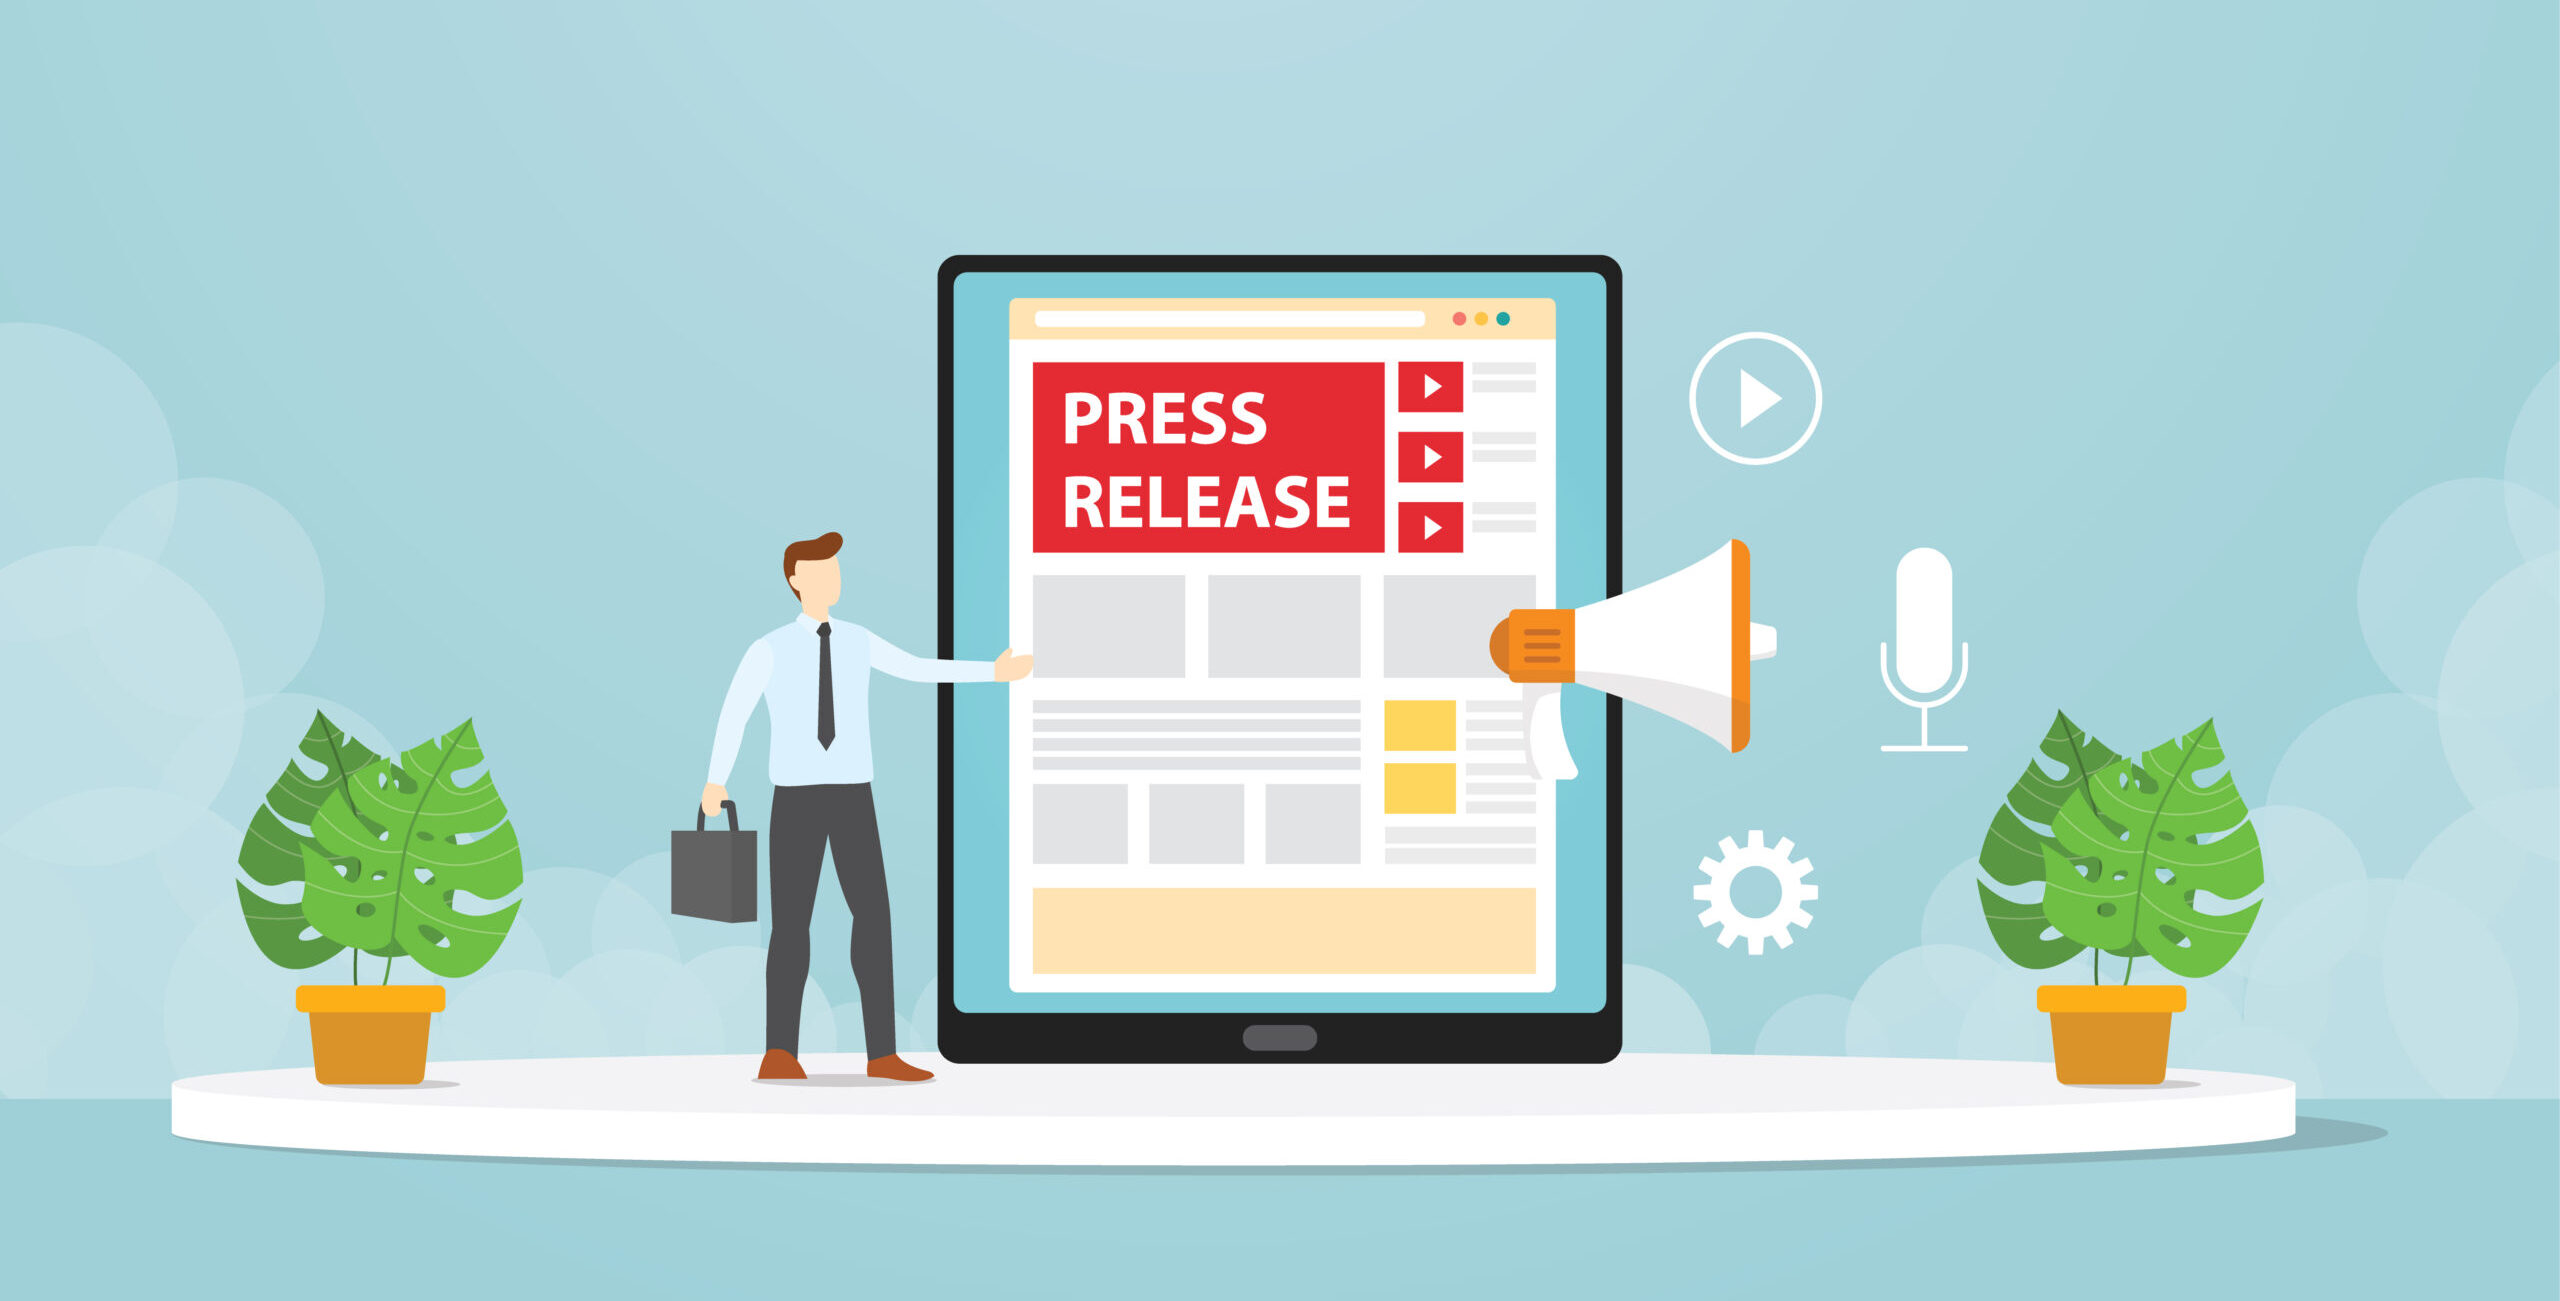 What’s the Best Time to Send a Press Release?